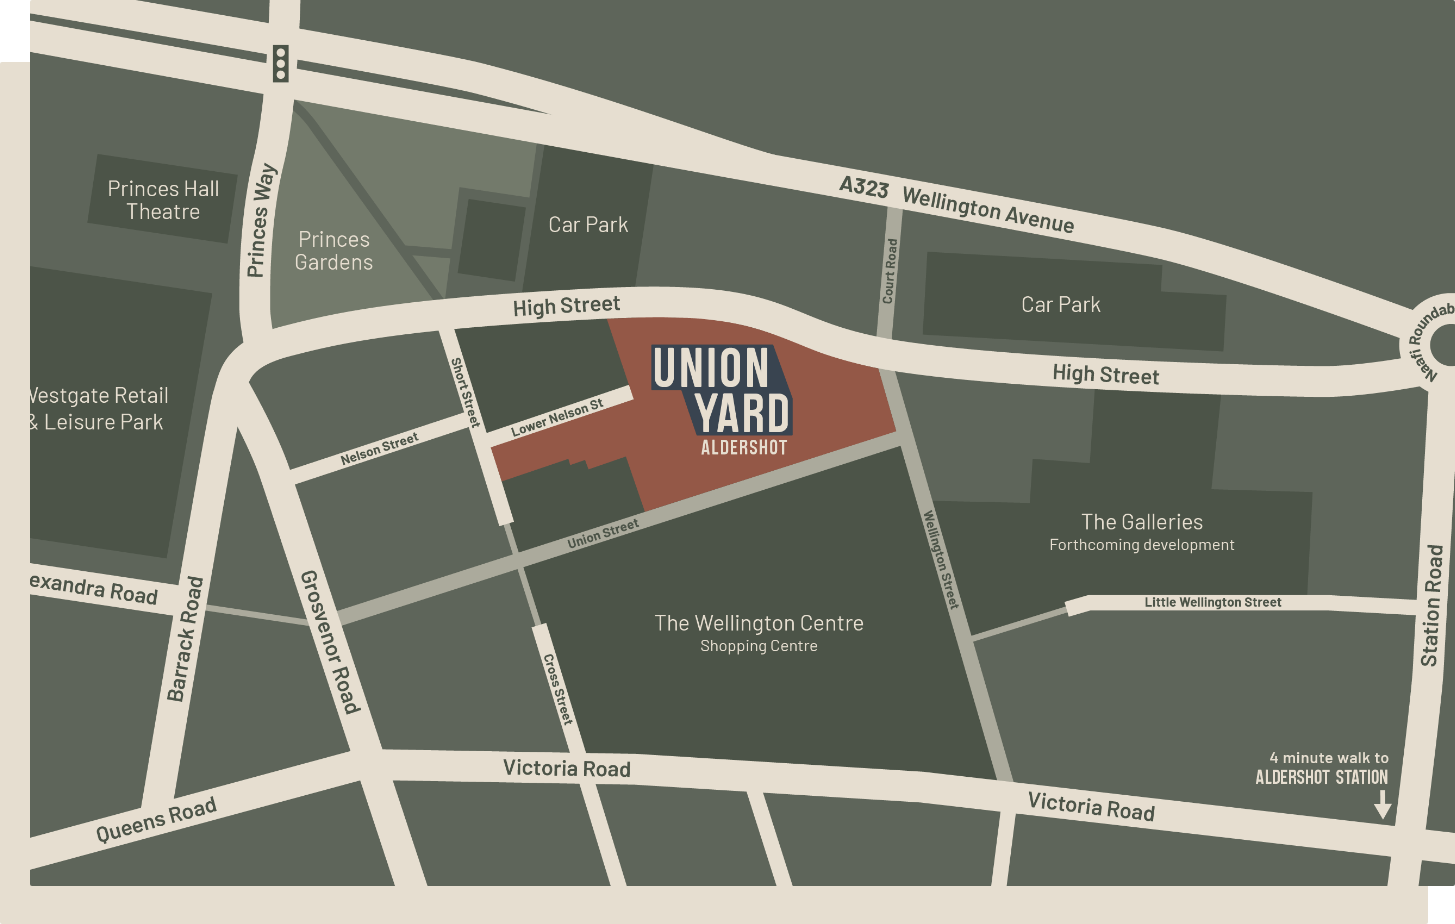 Map of Aldershot town centre showing where Union Yard is located.